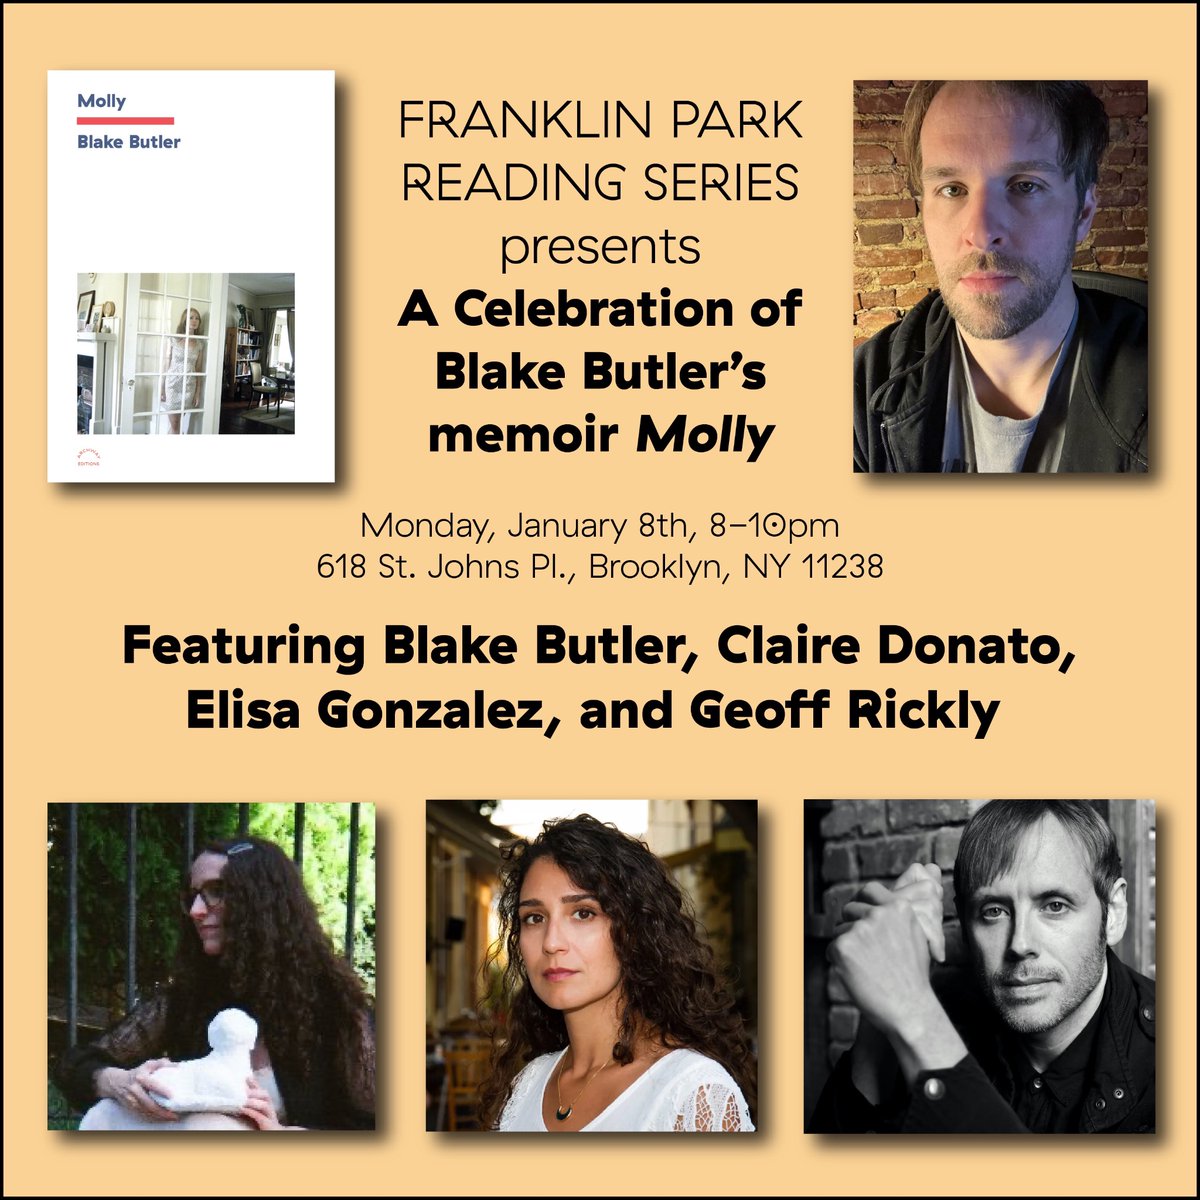 Tonight @FranklinParkBK see AE superstars @blakebutler and @clairedonato with @athenek and Geoff Rickly of @thursdayband - @UnnameableB will be selling KIND MIRRORS, UGLY GHOSTS and a limited quantity of MOLLY!